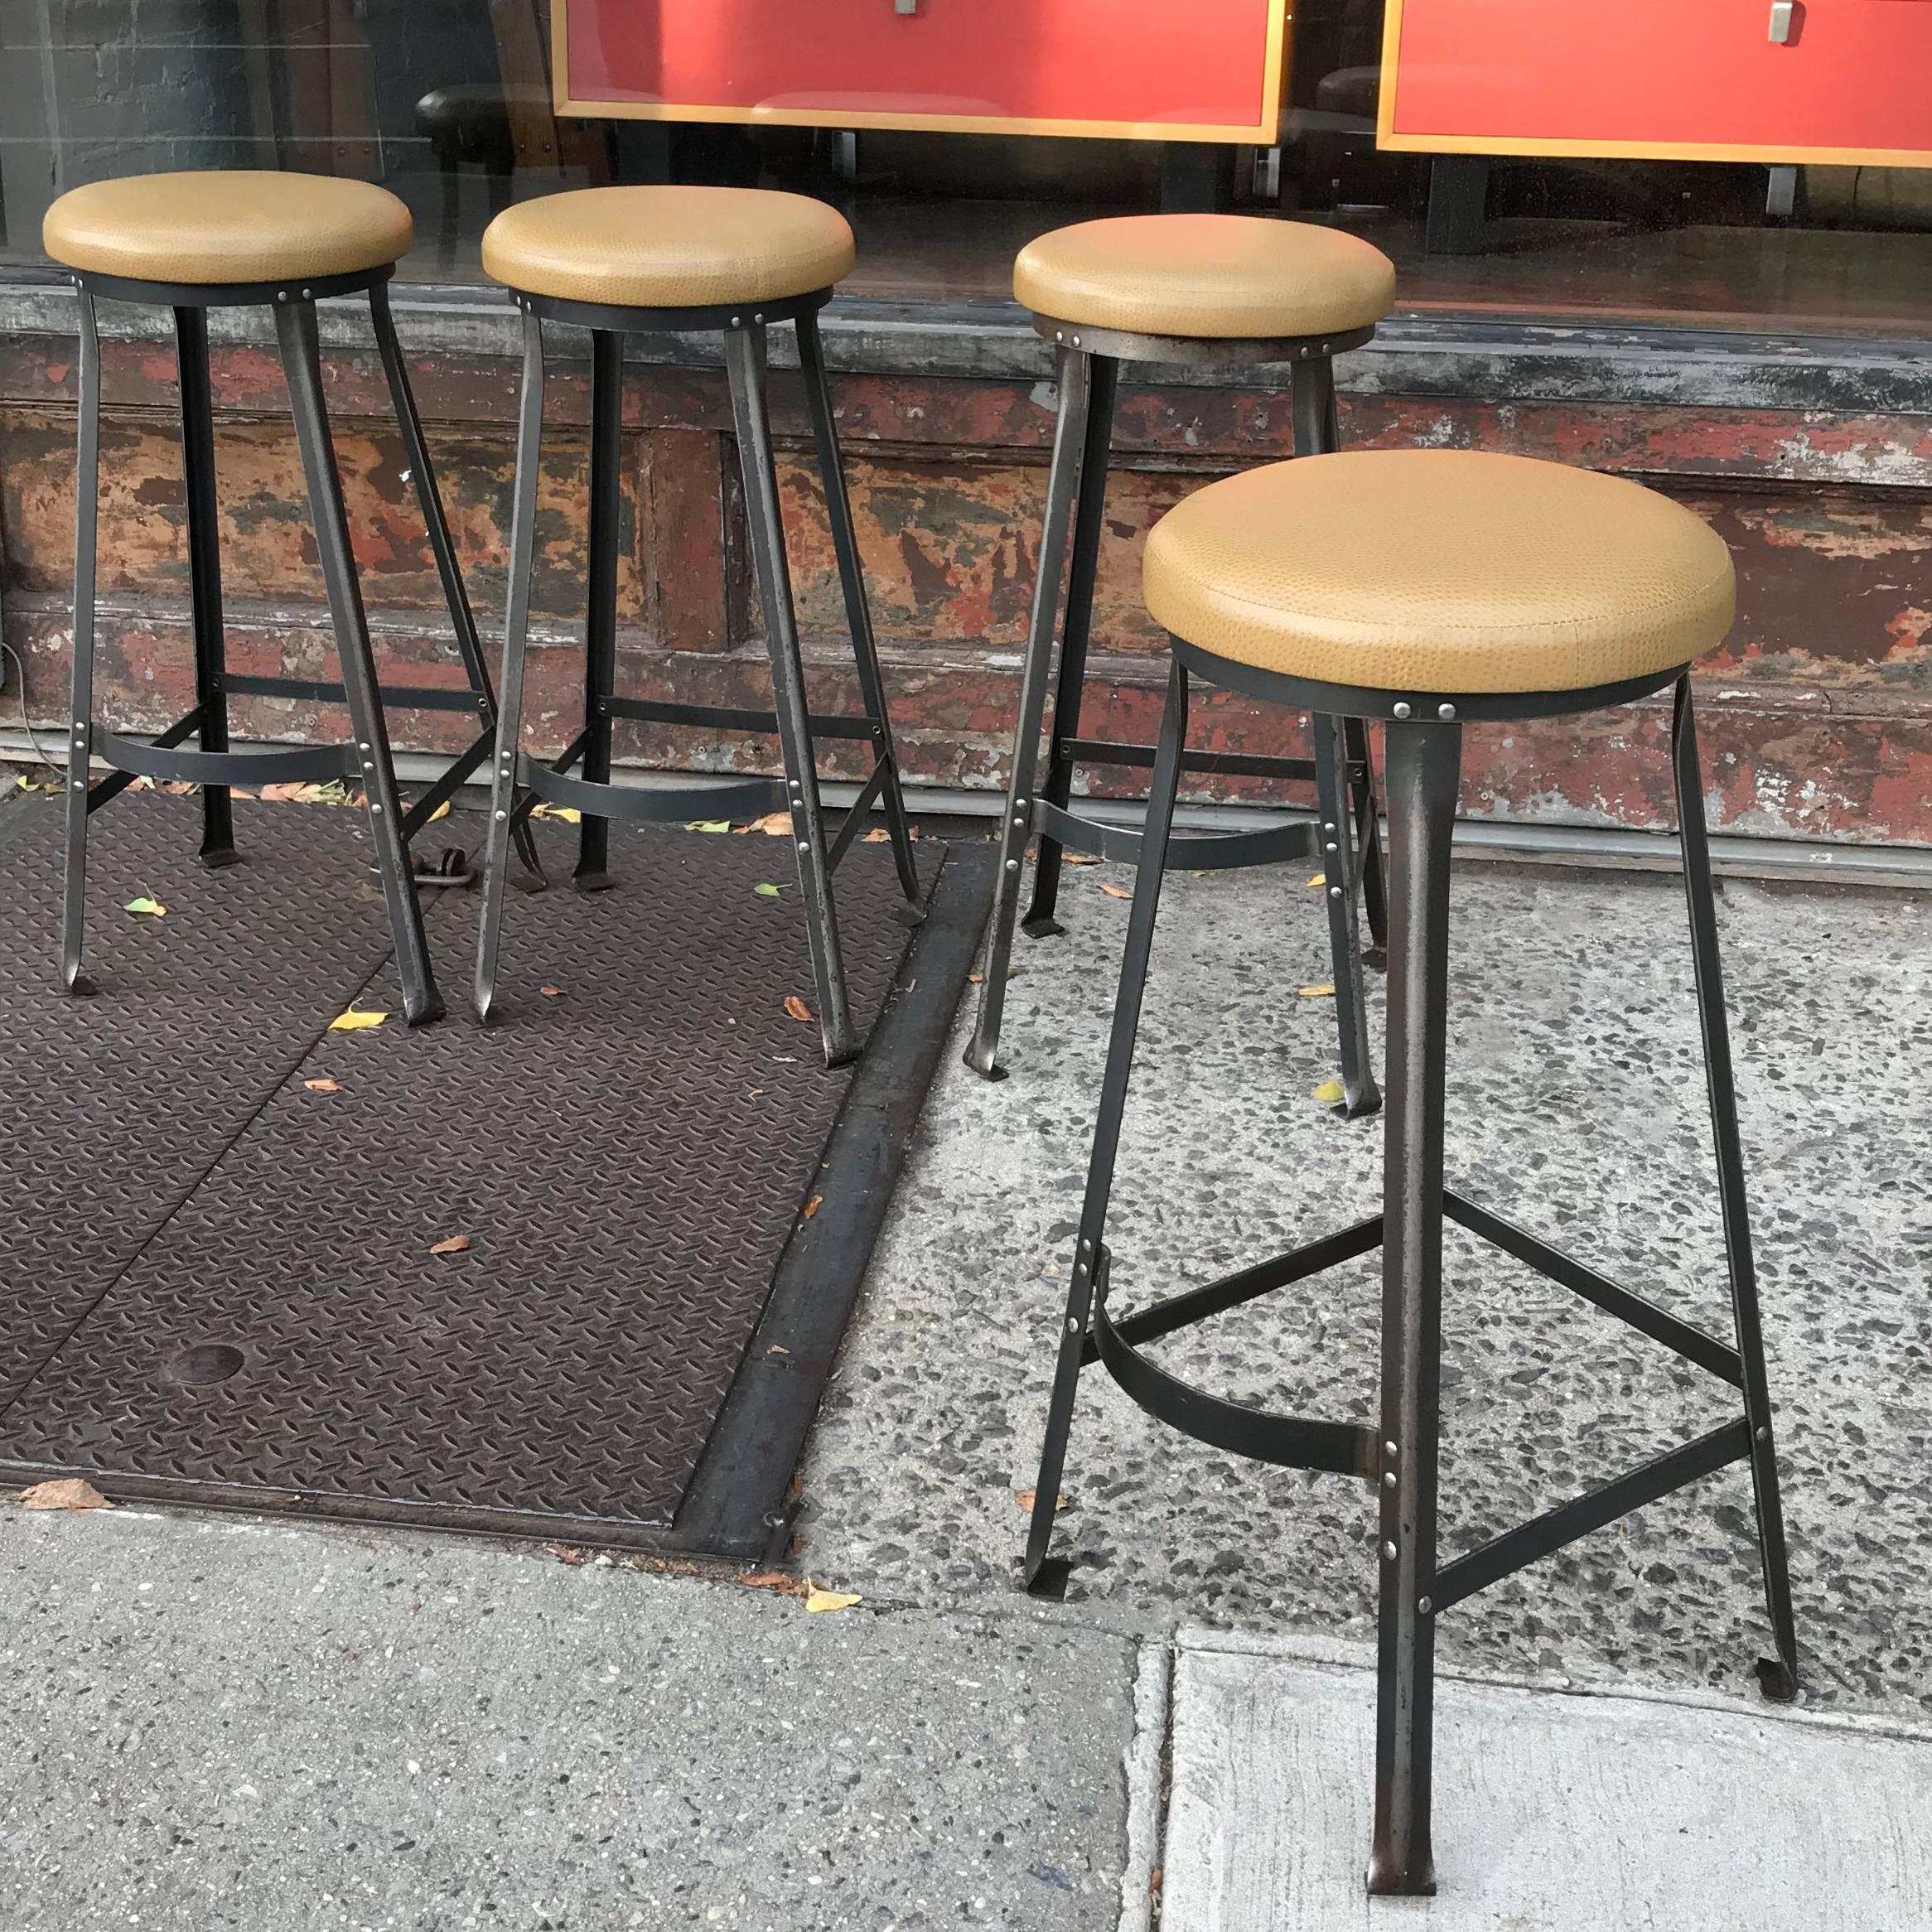 Set of four, 1940s, Industrial, barstools are newly upholstered in a faux-ostrich vinyl on stripped, angle iron bases. Seats are 14in. diameter.